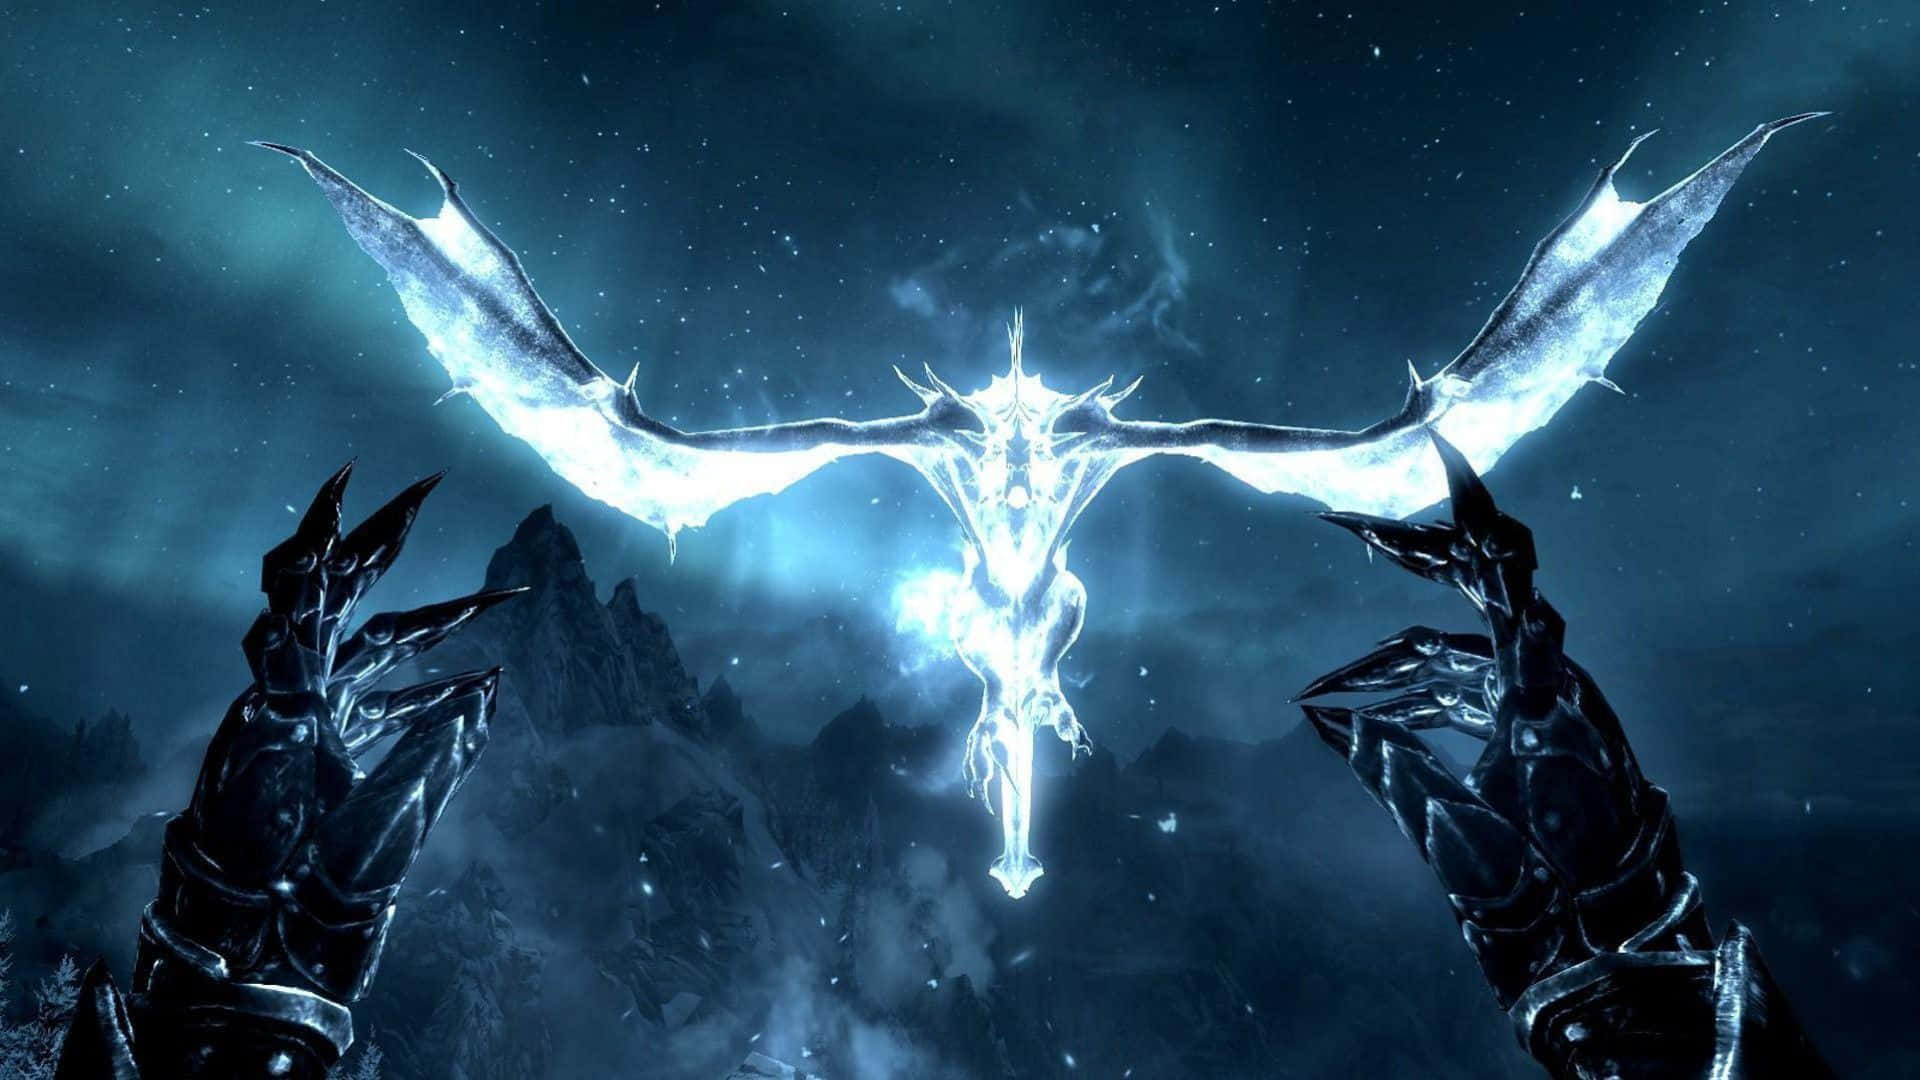 "Explore the Land of Skyrim From Your Desktop" Wallpaper